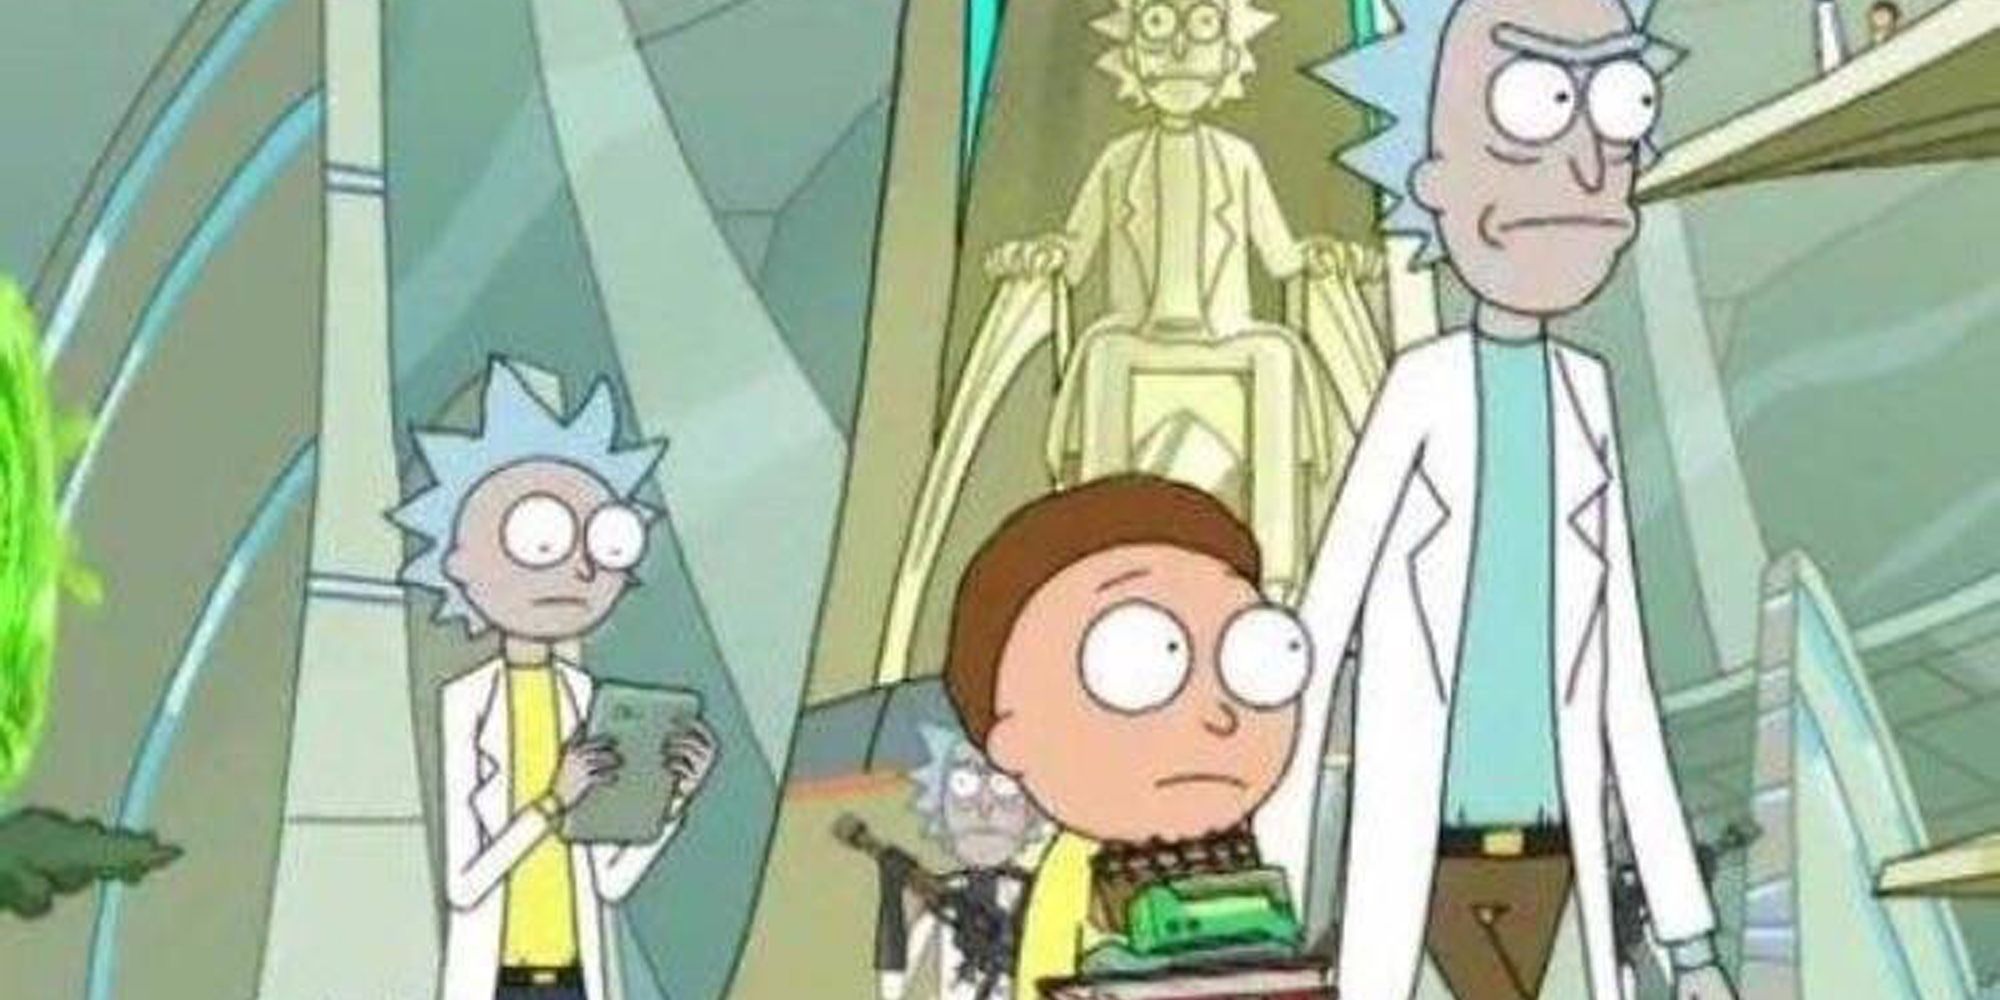 Rick Morty Or Morty Rick In The Background